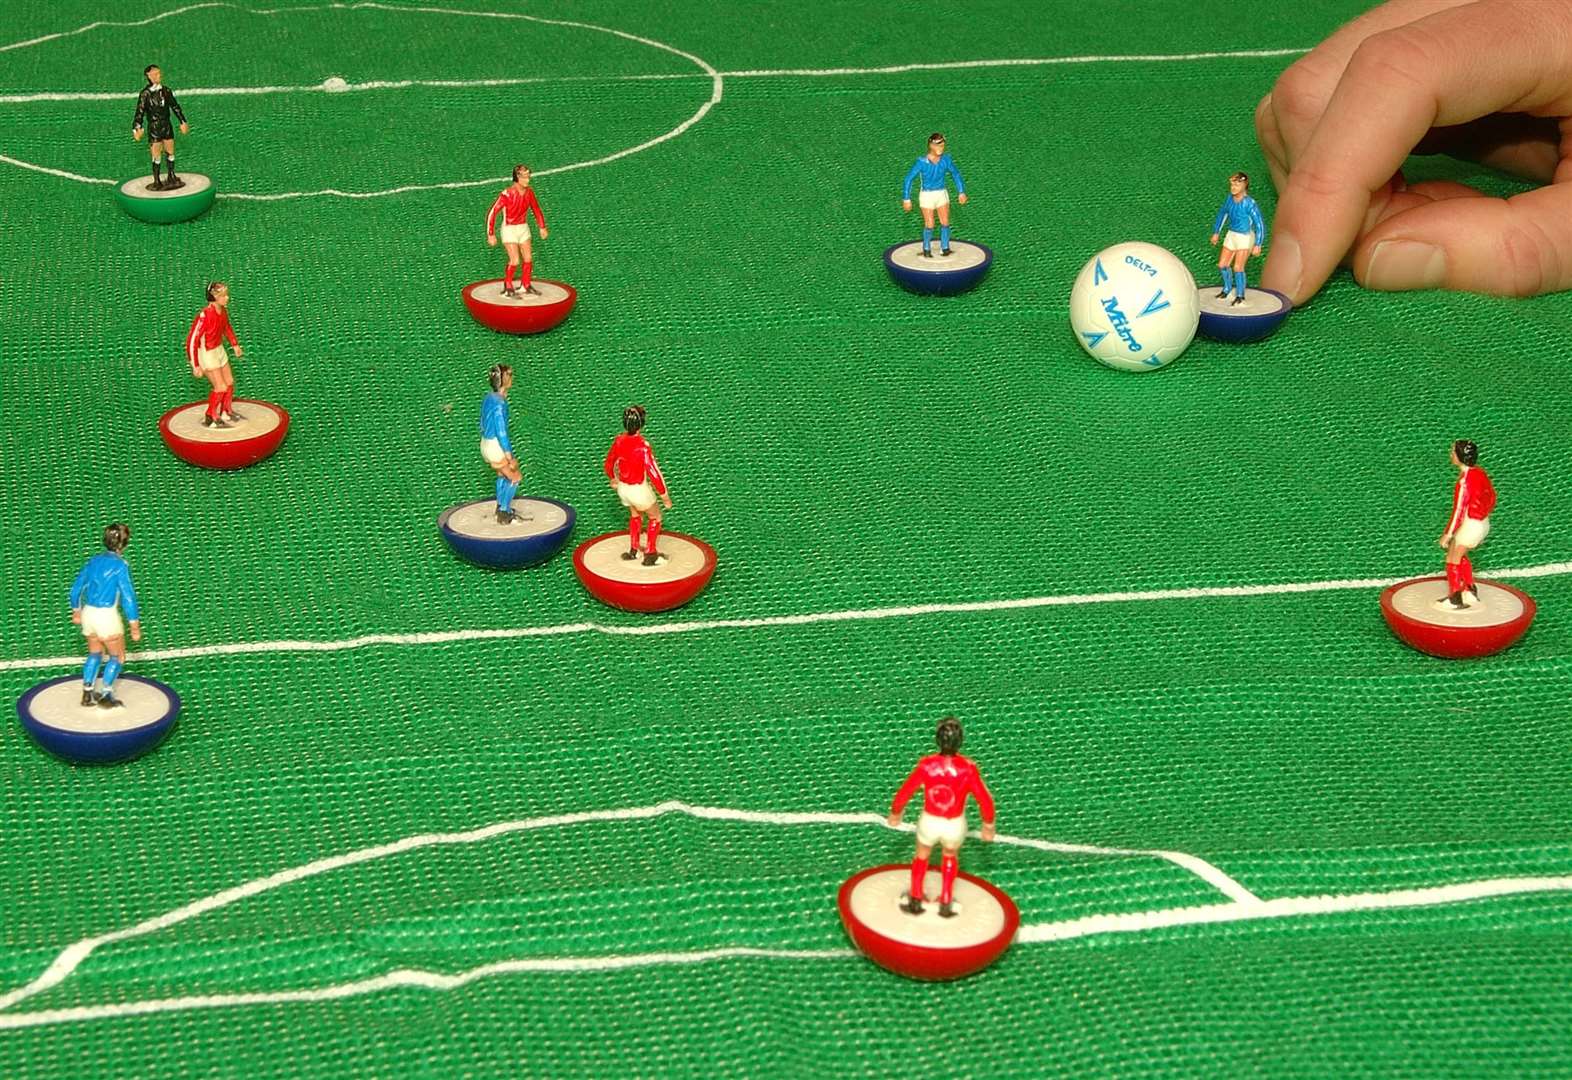 Tunbridge Wells to host the 2024 Subbuteo World Cup after beating off  competition to host the international event